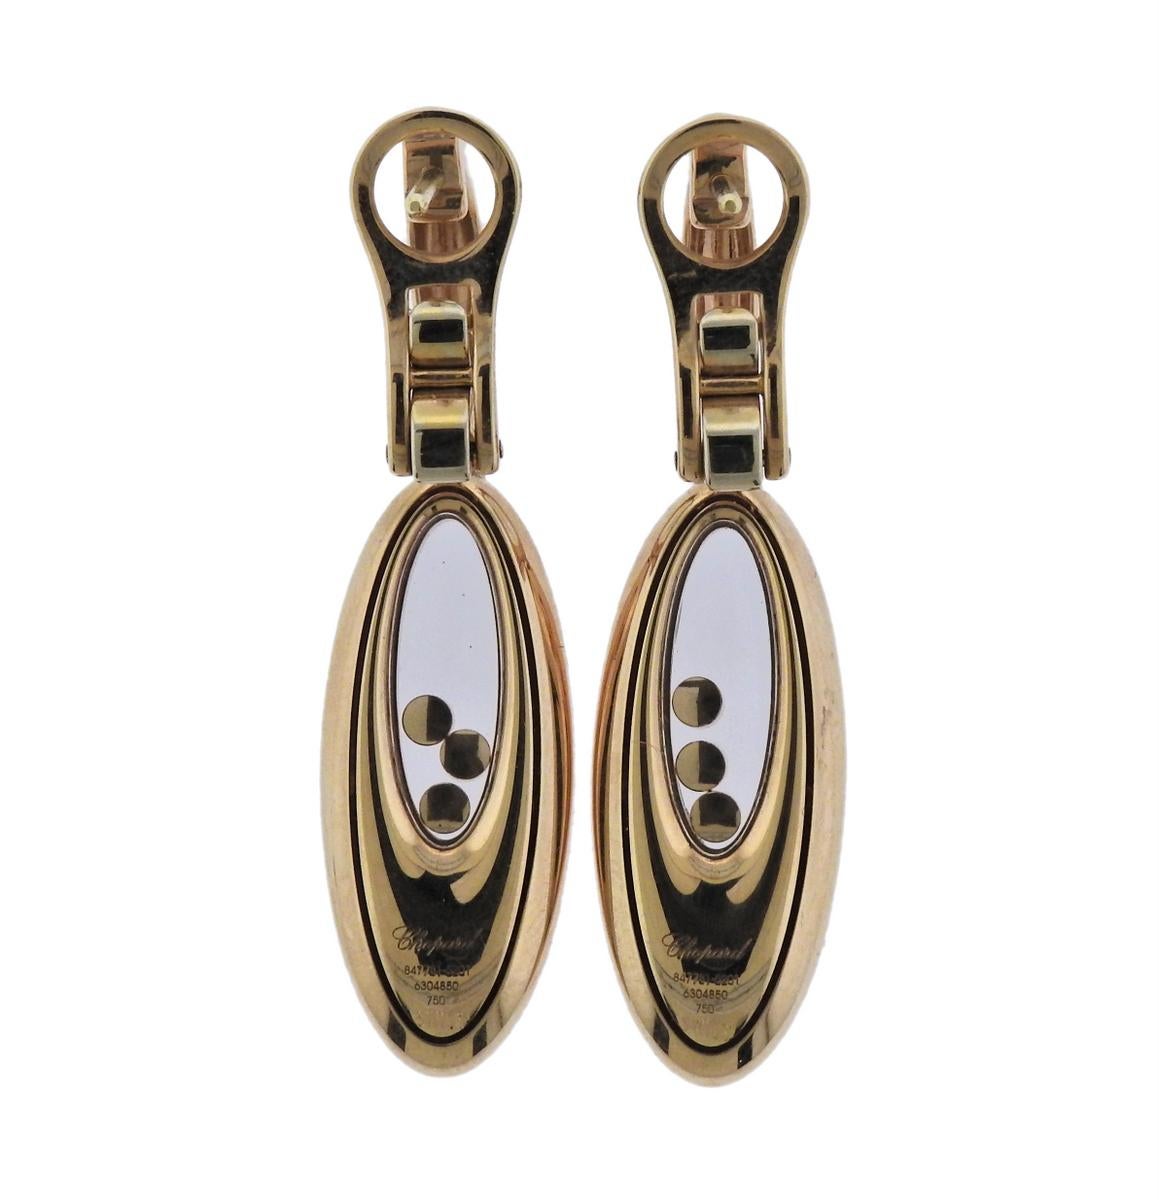  18k gold drop earrings, crafted by Chopard for Happy Diamonds collection, featuring iconic floating diamonds in the center (approx. 0.18ctw). Retail $7070. Earrings are 43mm x 11mm, weigh 20 grams. Marked: Chopard, 750, 847781-5201, 6304850, Swiss.